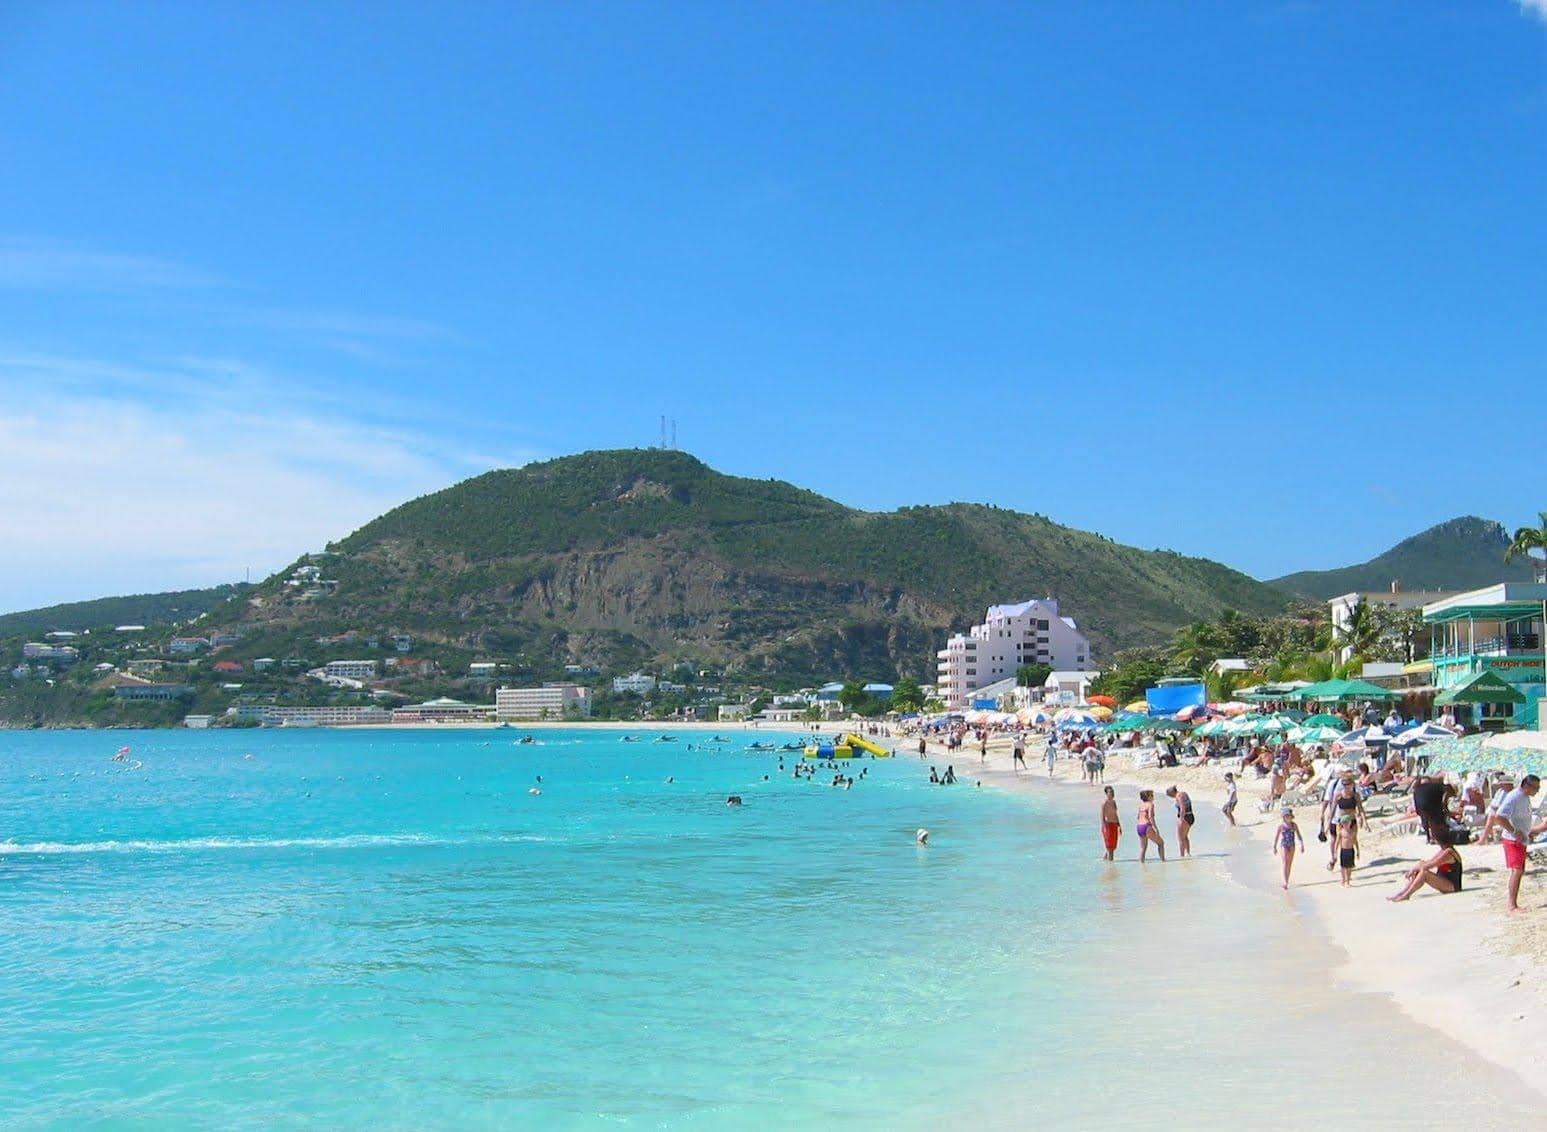 Sint Maarten, Netherlands Antilles: It’s French. No, it’s Dutch. No, French…